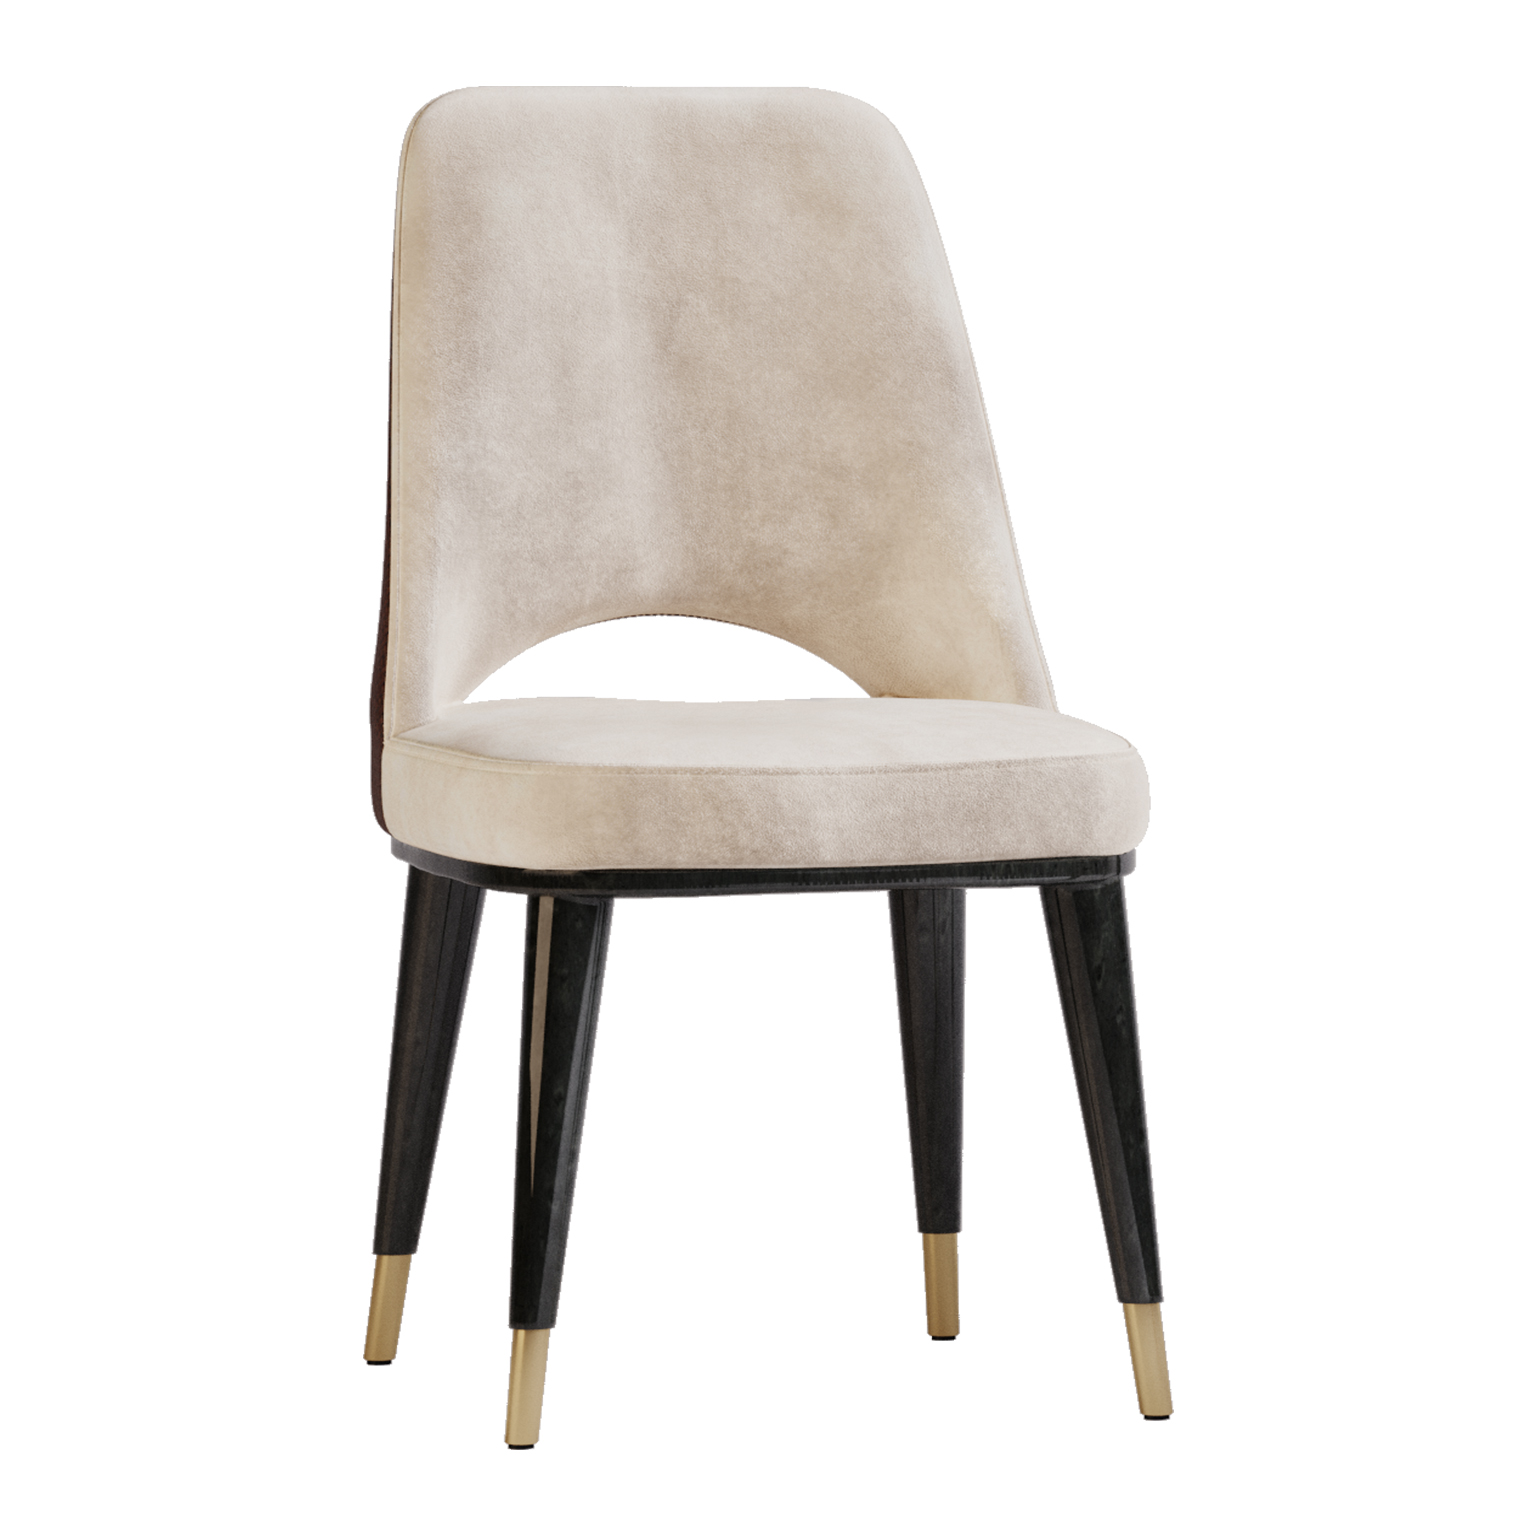 Dining or side chair with flour lacquer tapered legs with brass feet caps and open back detail